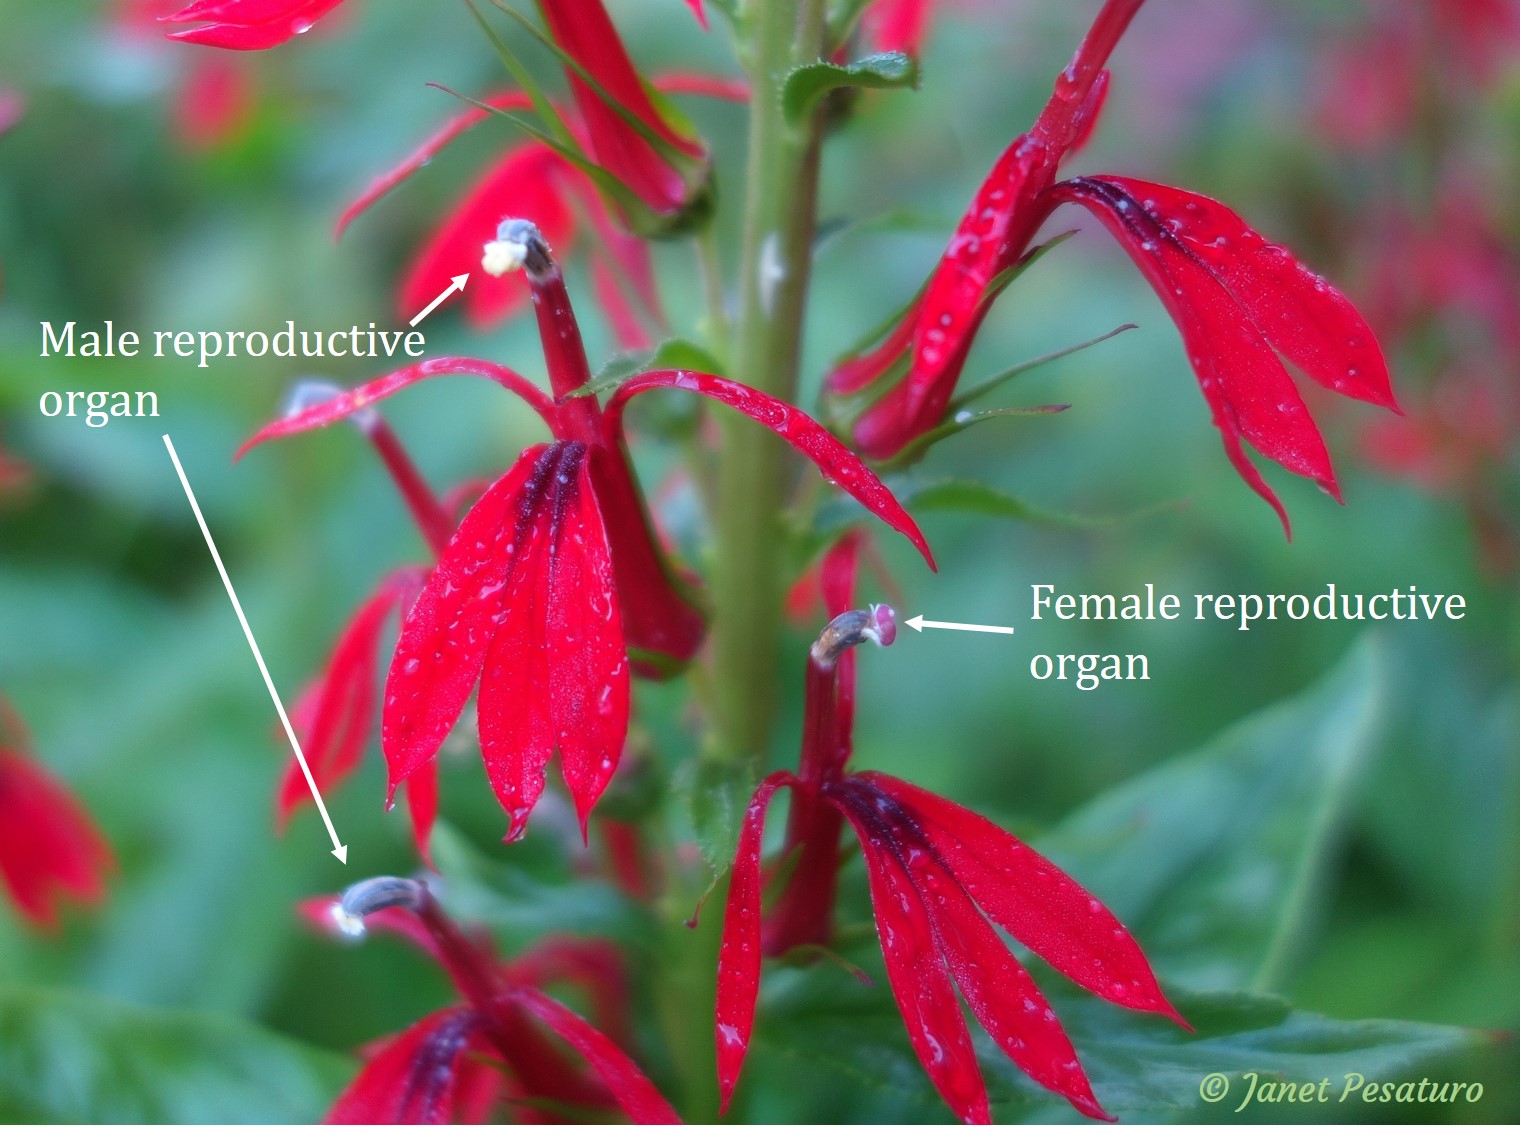 Close-up of cardinal flower showing male and female reproductive organs